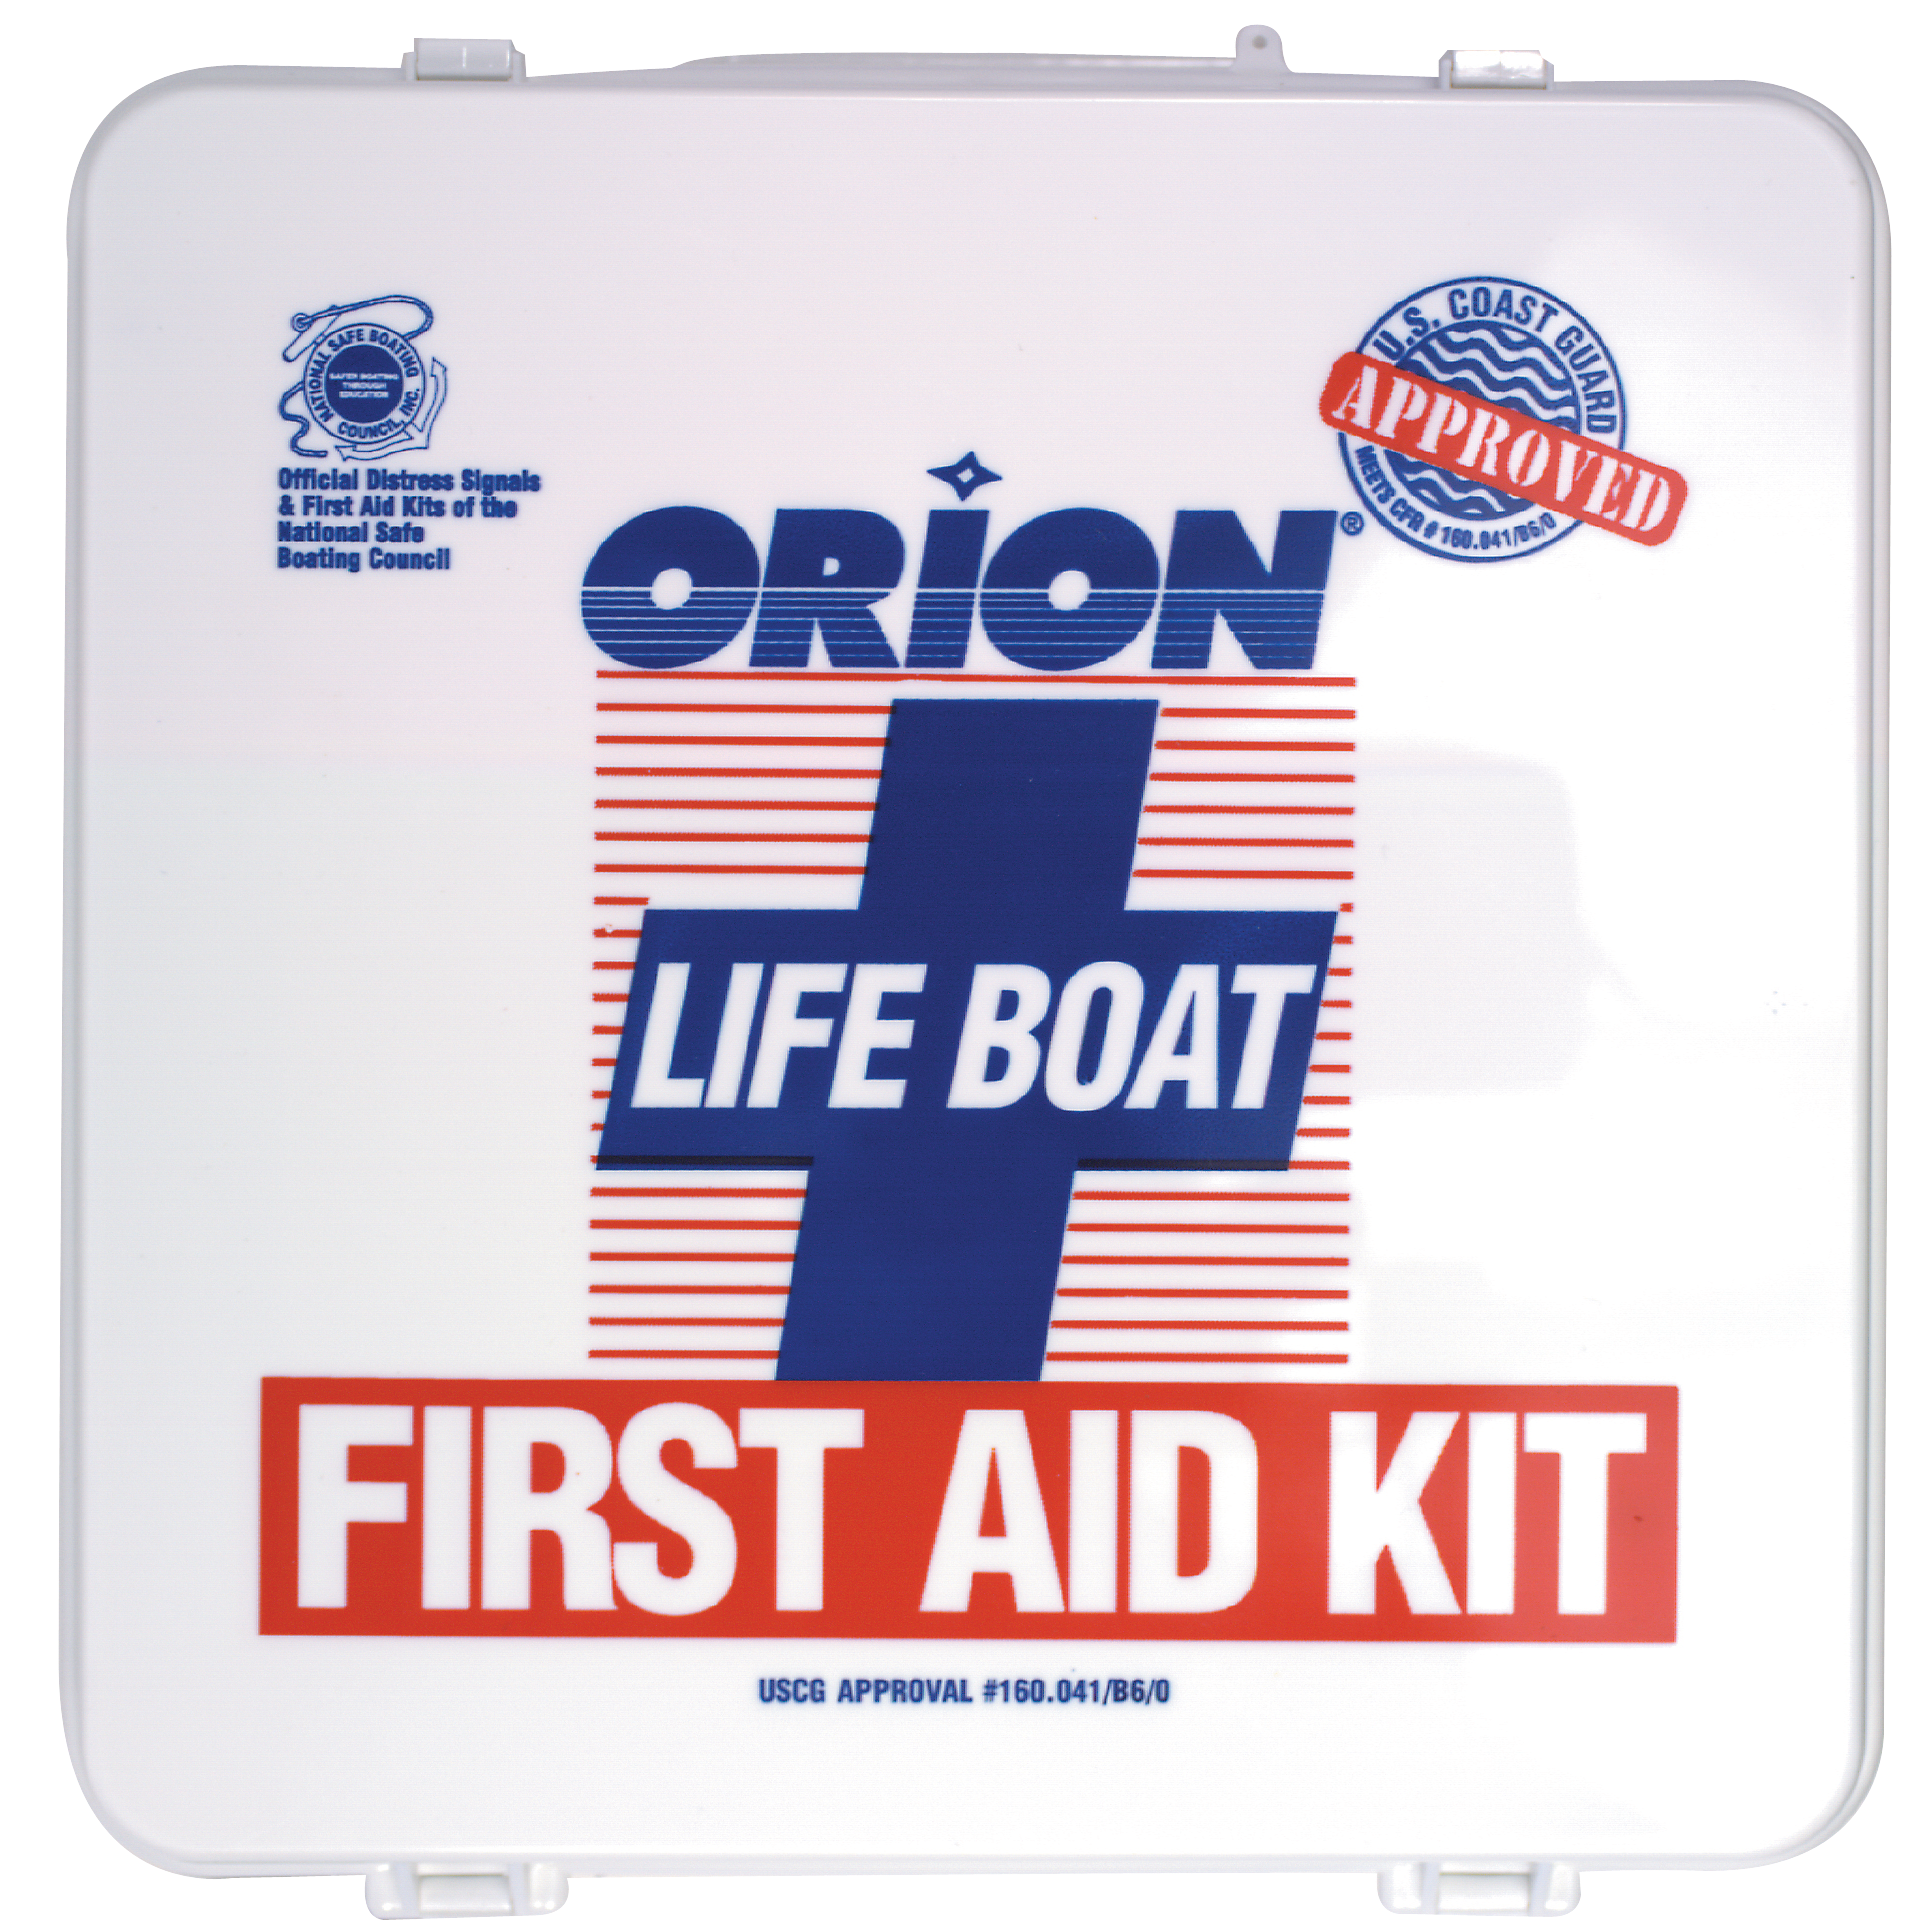 Life Boat First Aid Kit